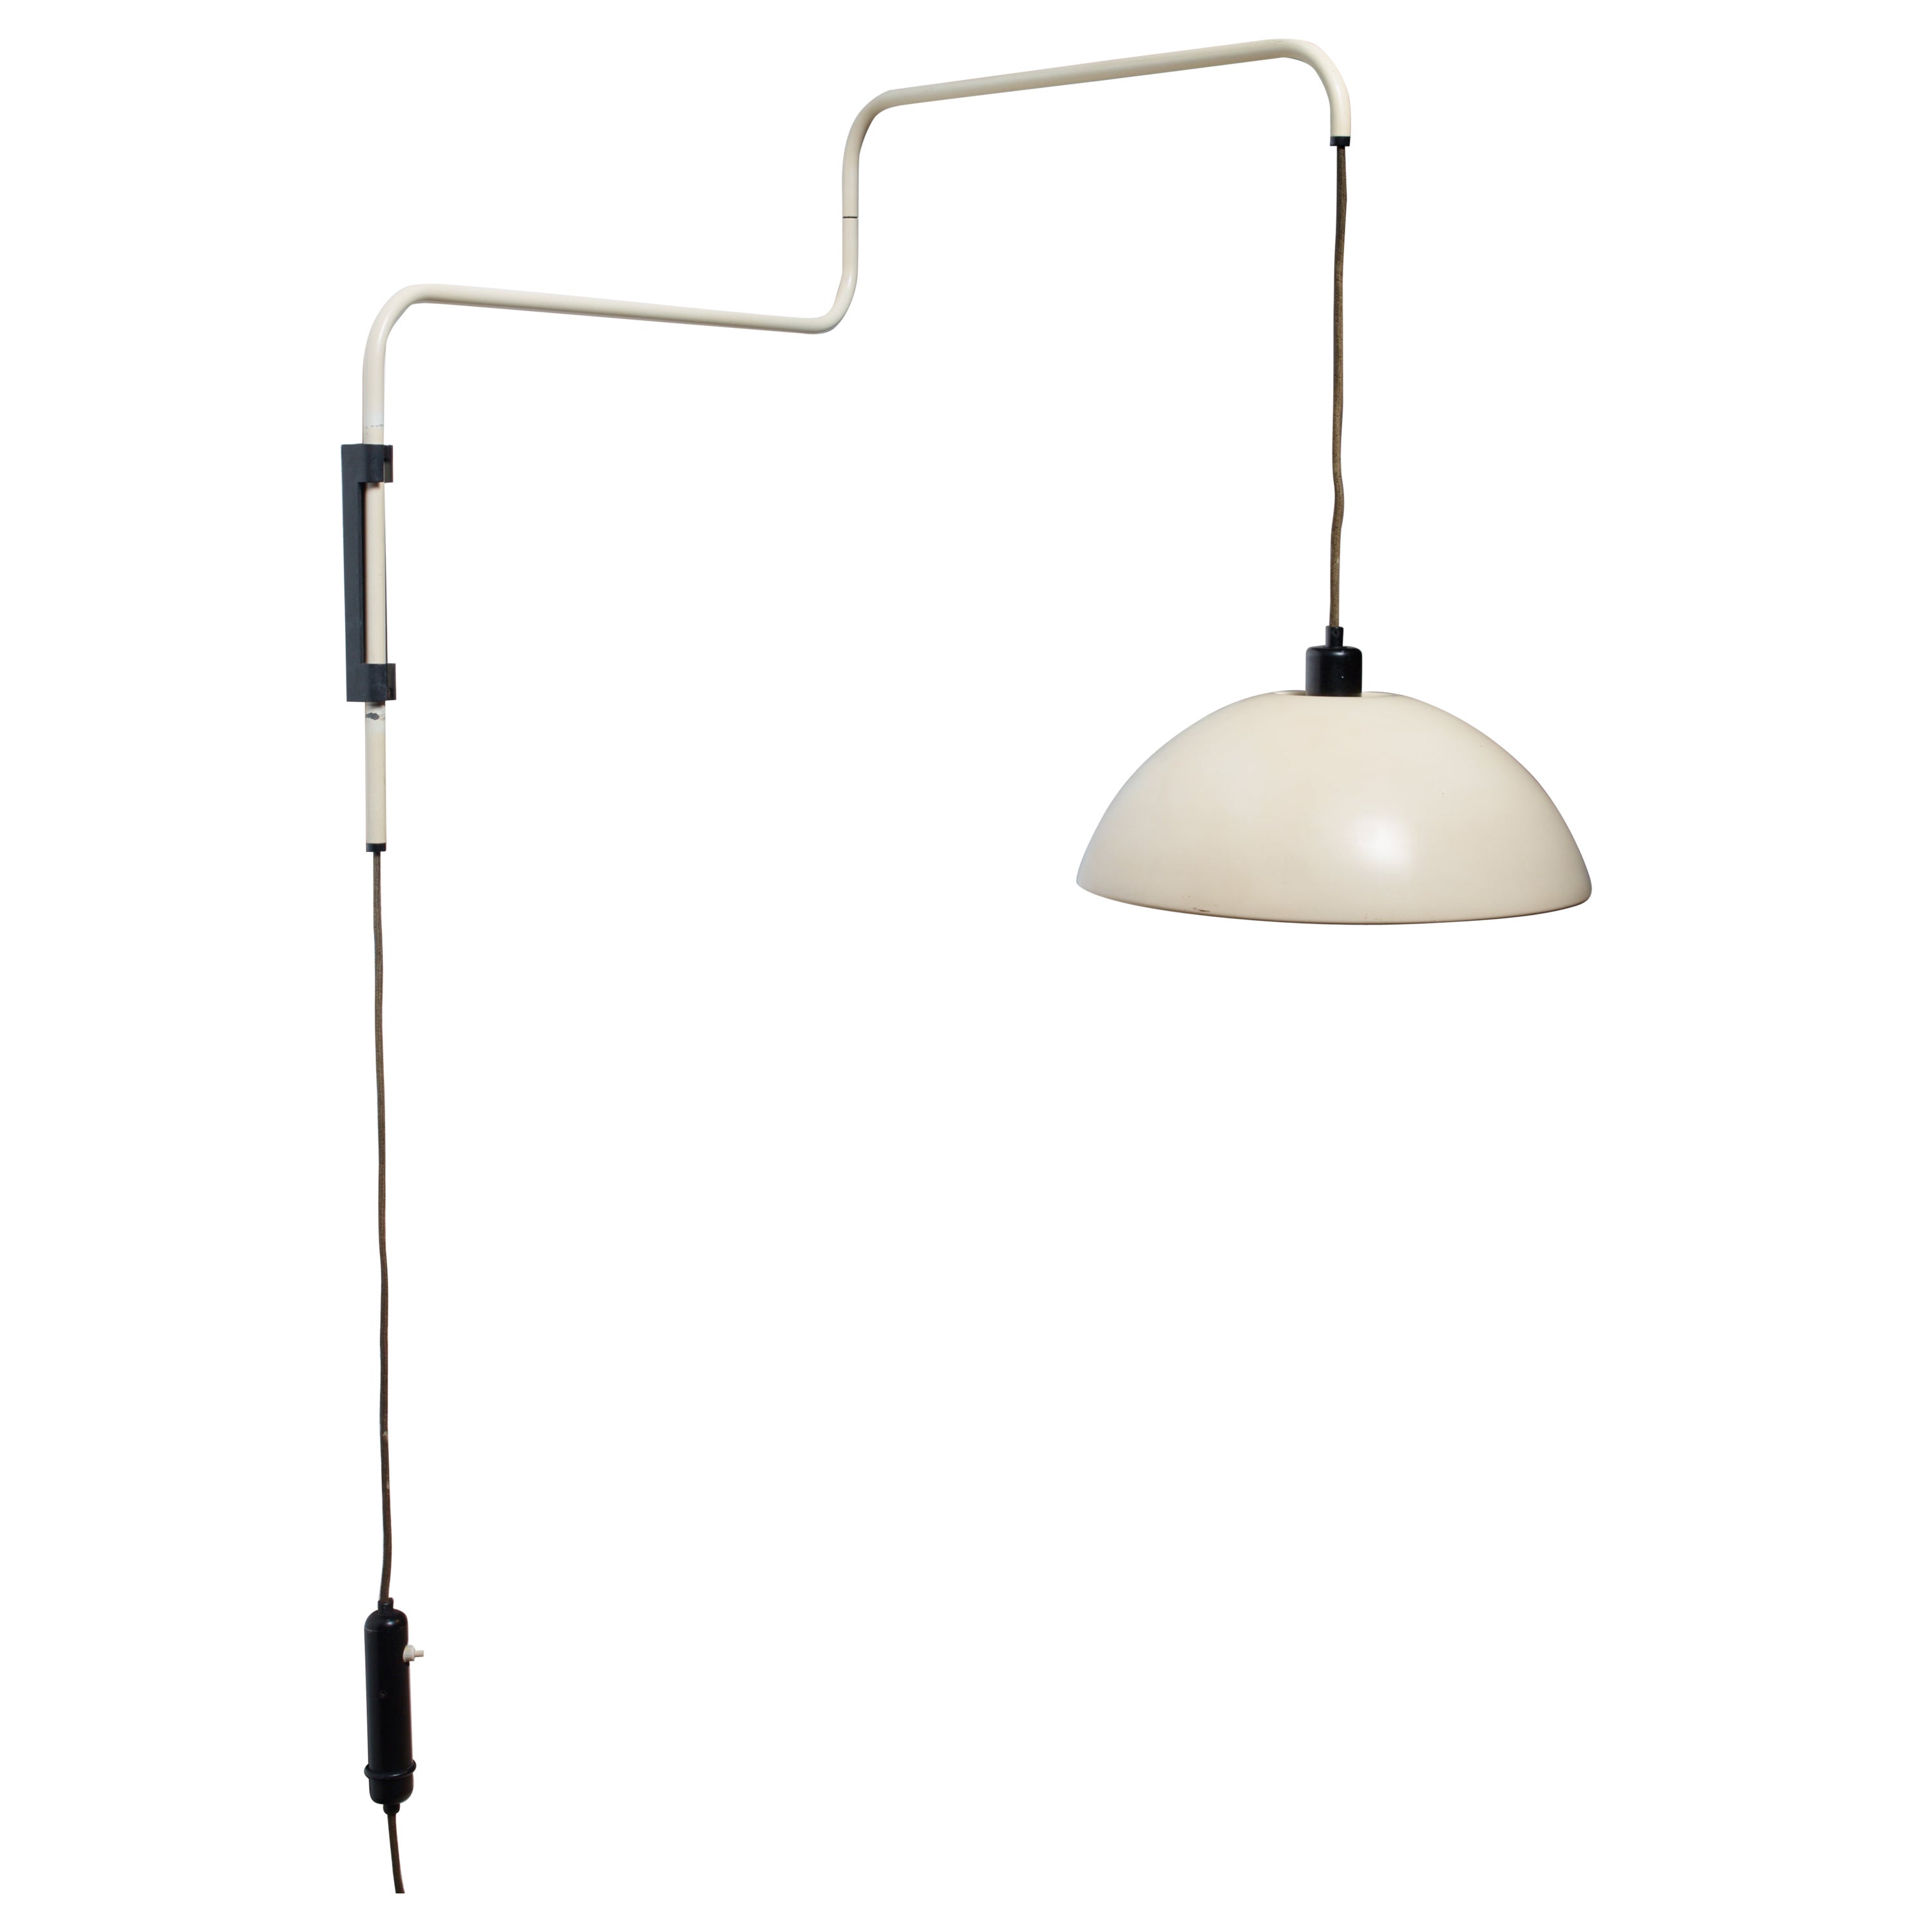 Elio Martinelli Swiveling, Height-Adjustable Wall Lamp, 1960s For Sale